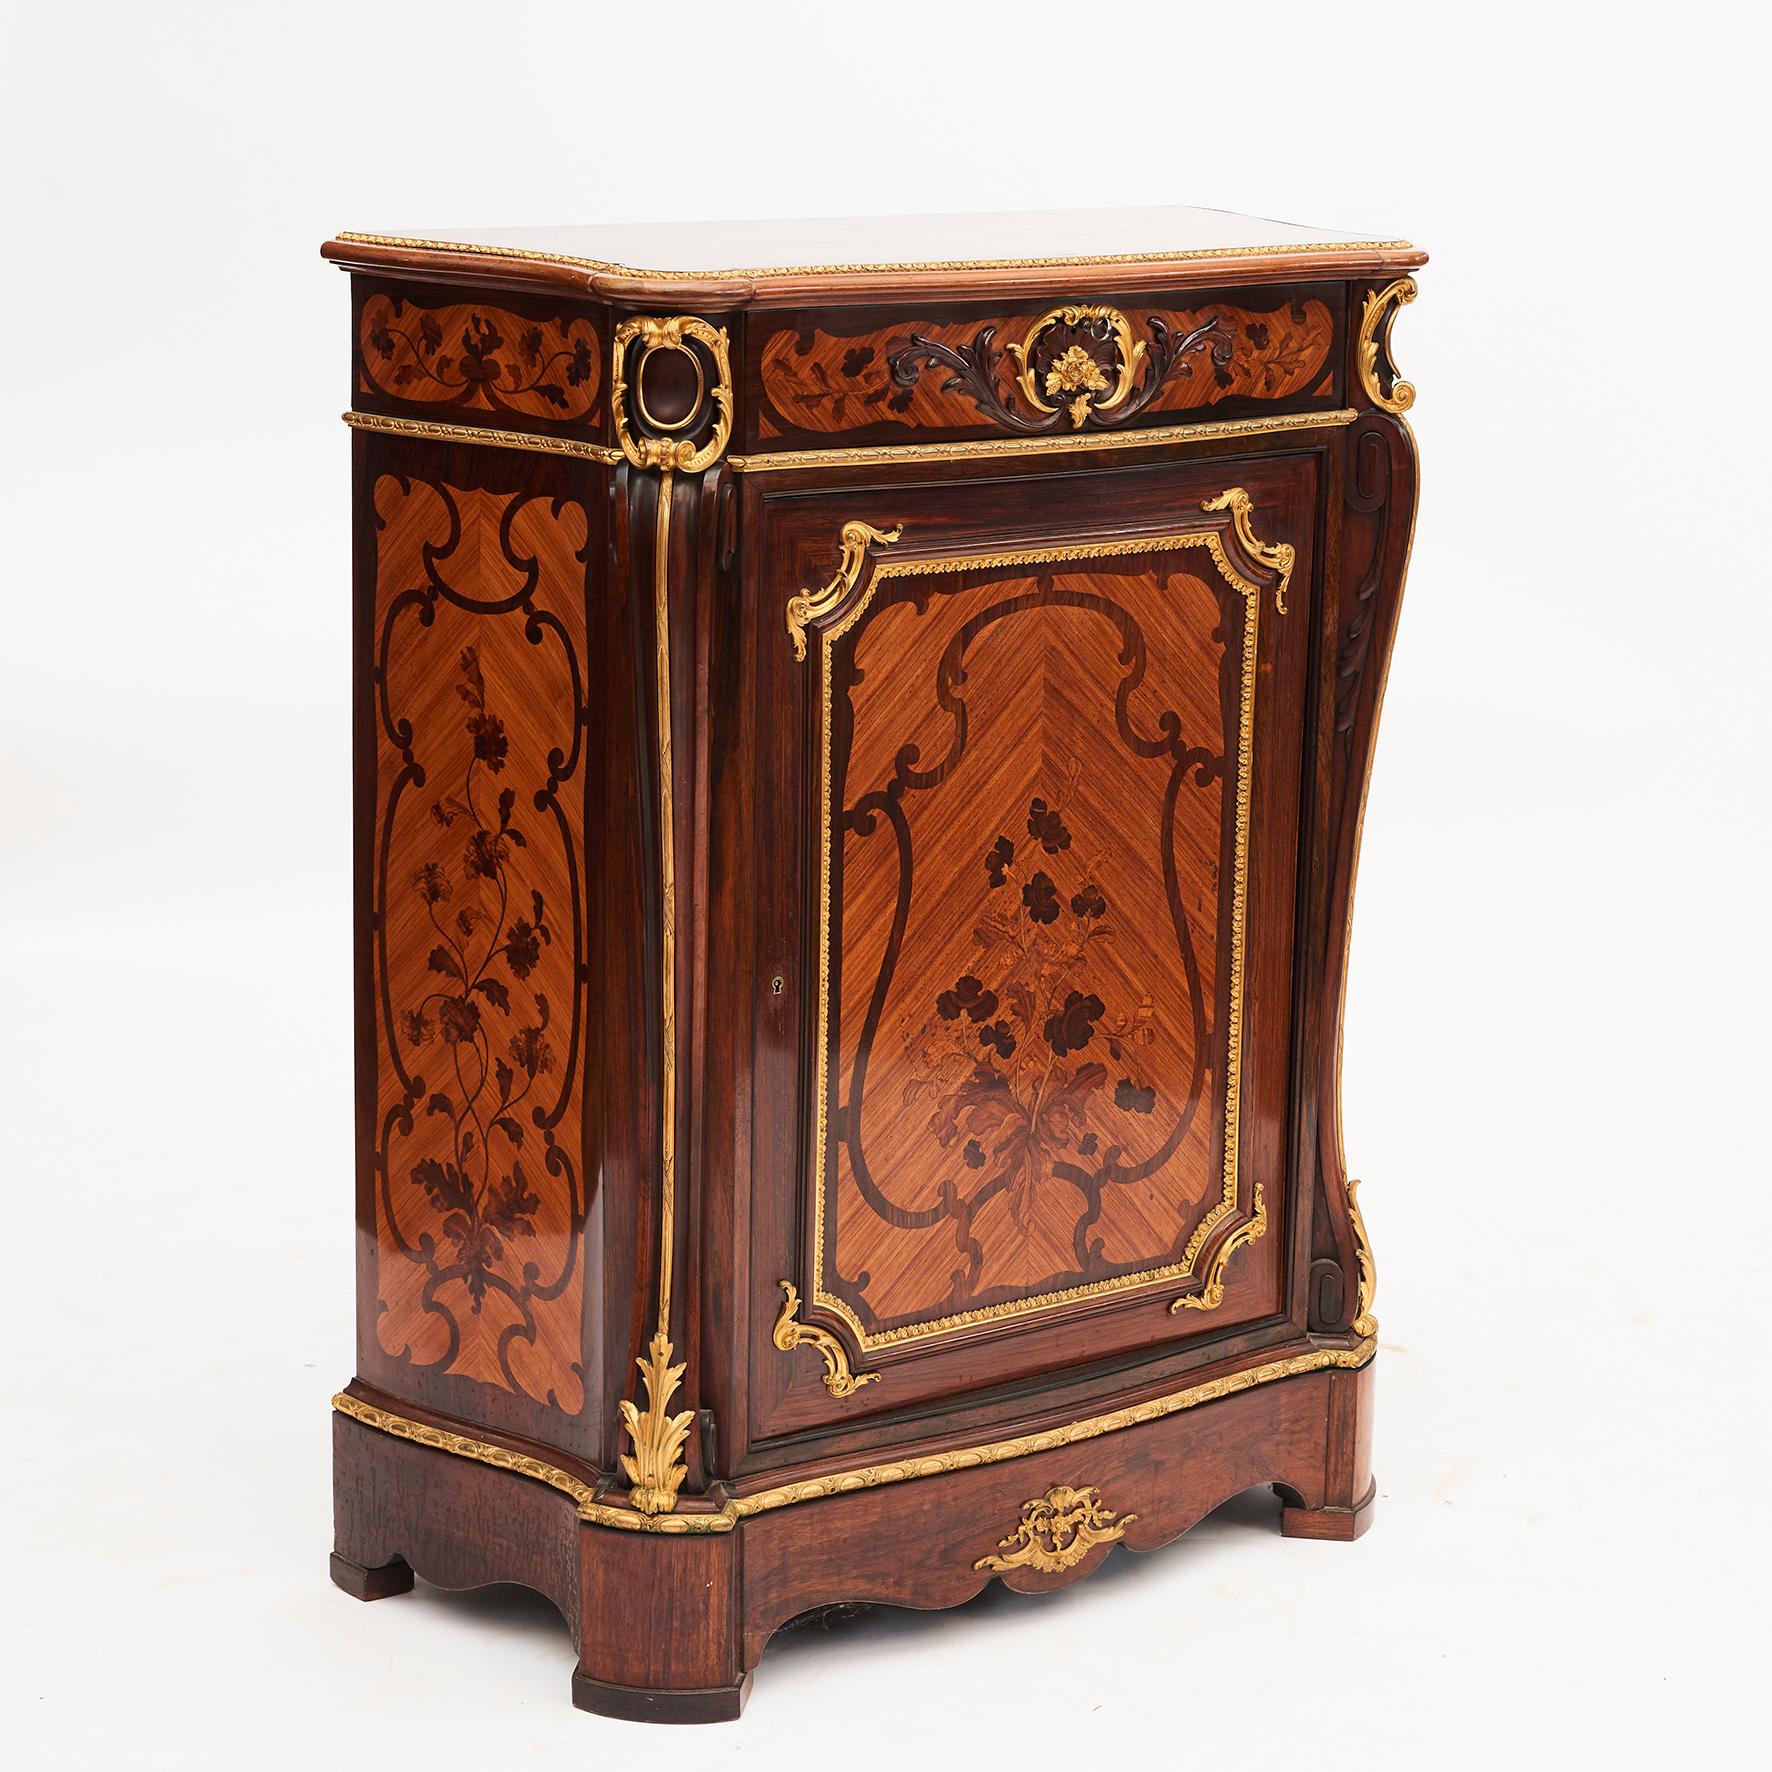 Napoleon III period cabinet stamped 